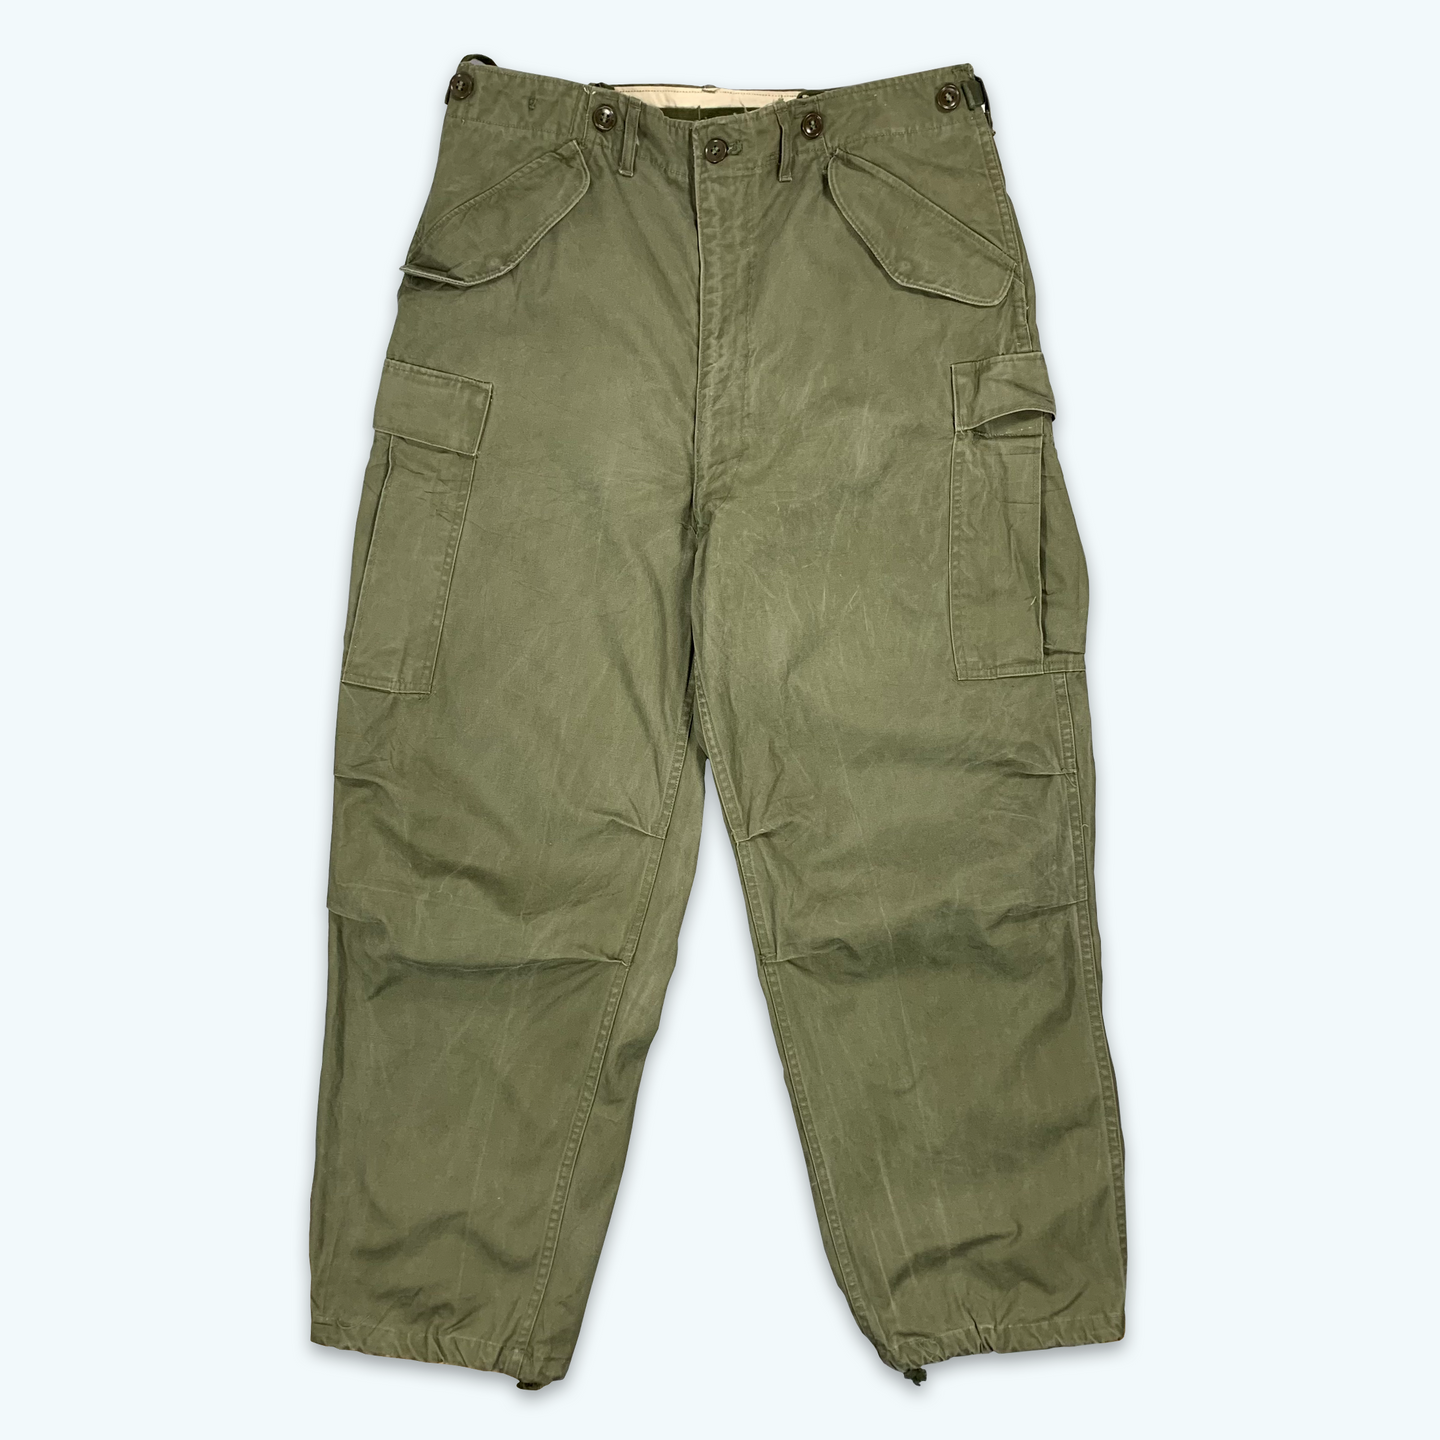 Vintage Military Cargo's (Green)